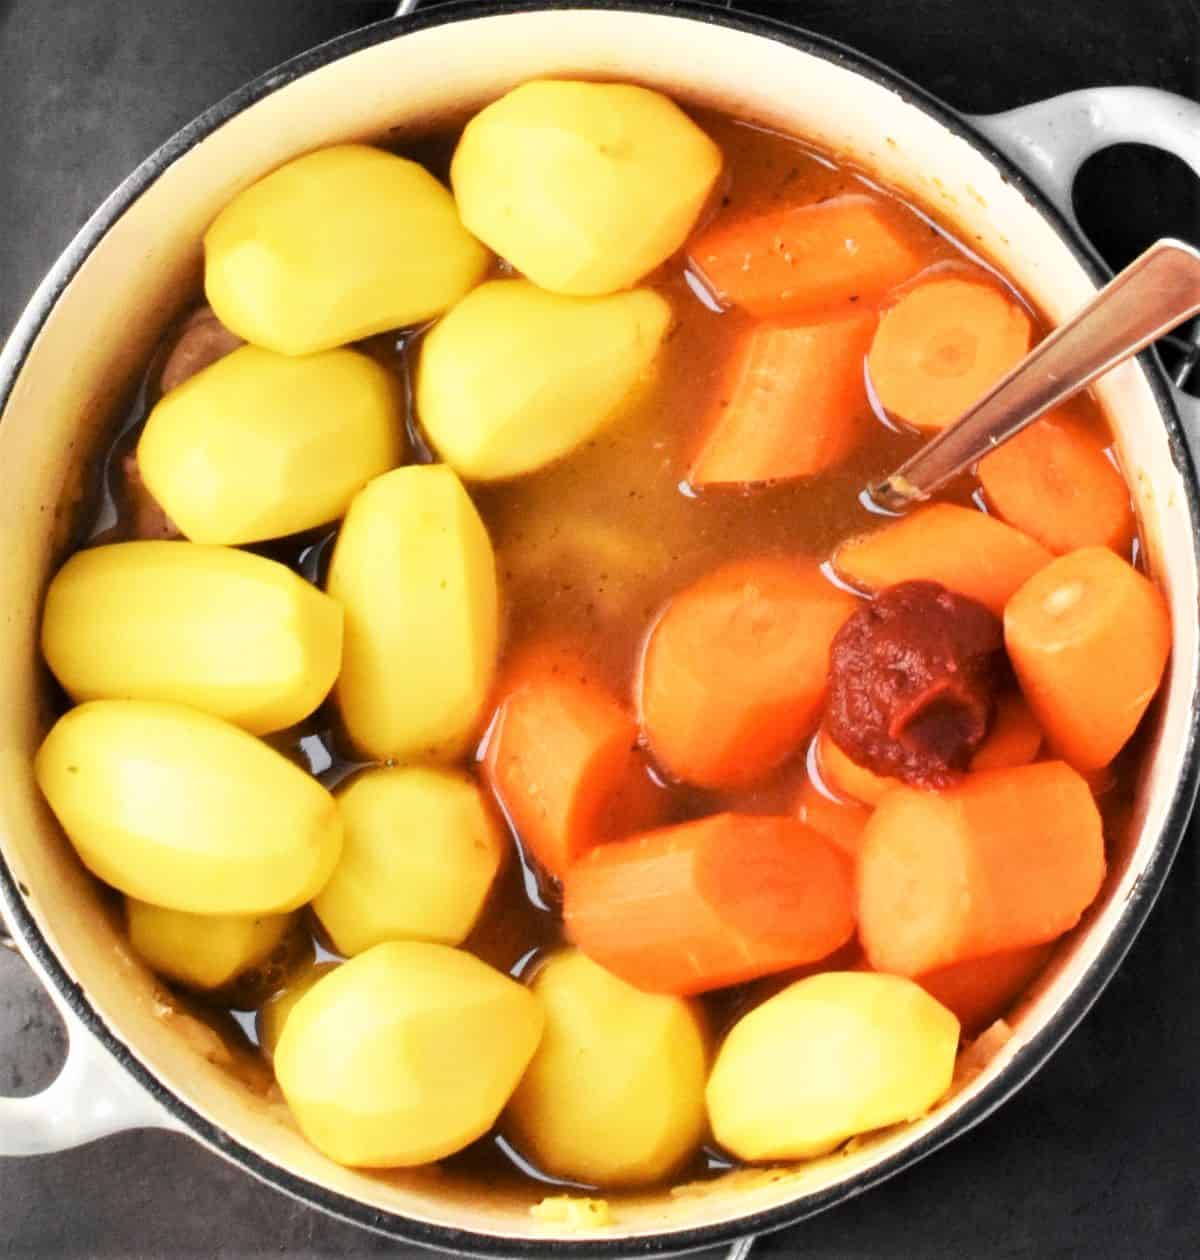 Potatoes, carrots and stock in large pot with spoon.